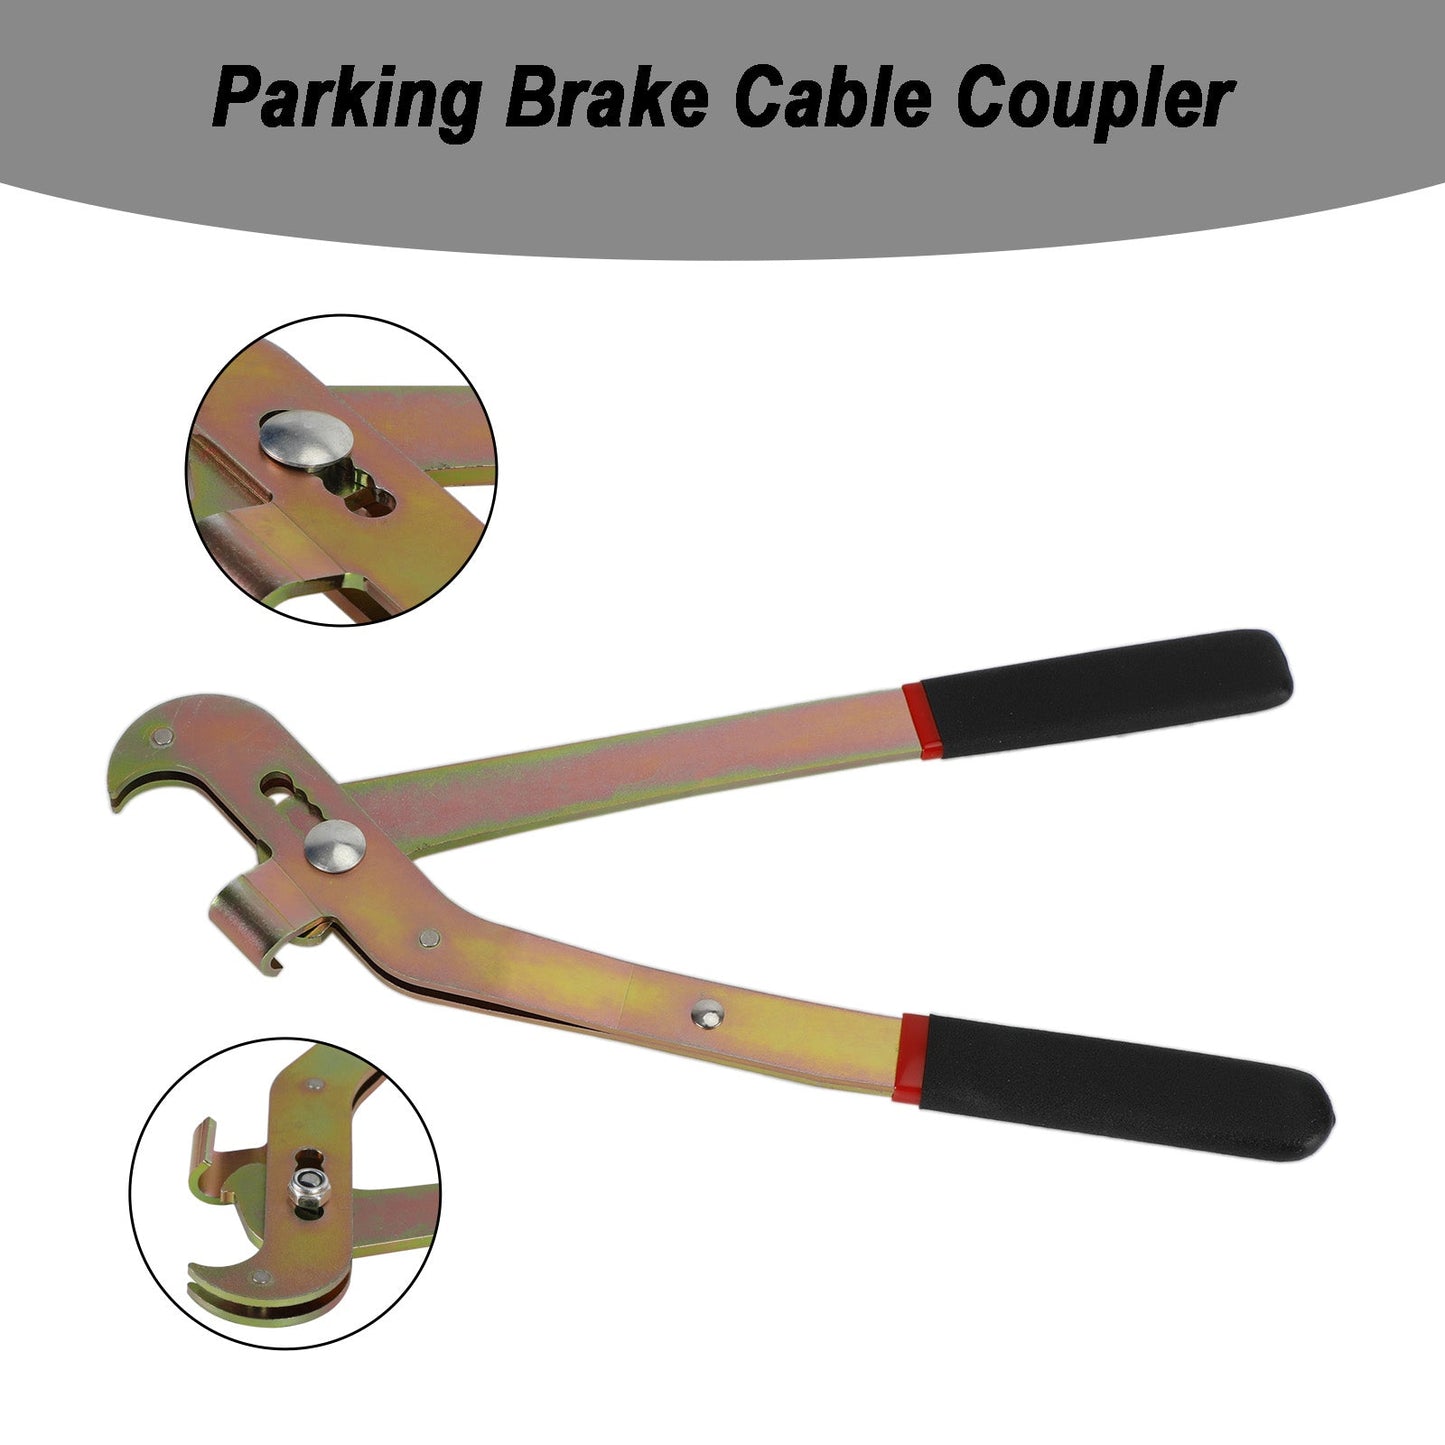 14 inch Parking Brake Cable Coupler Removal Tool 10500